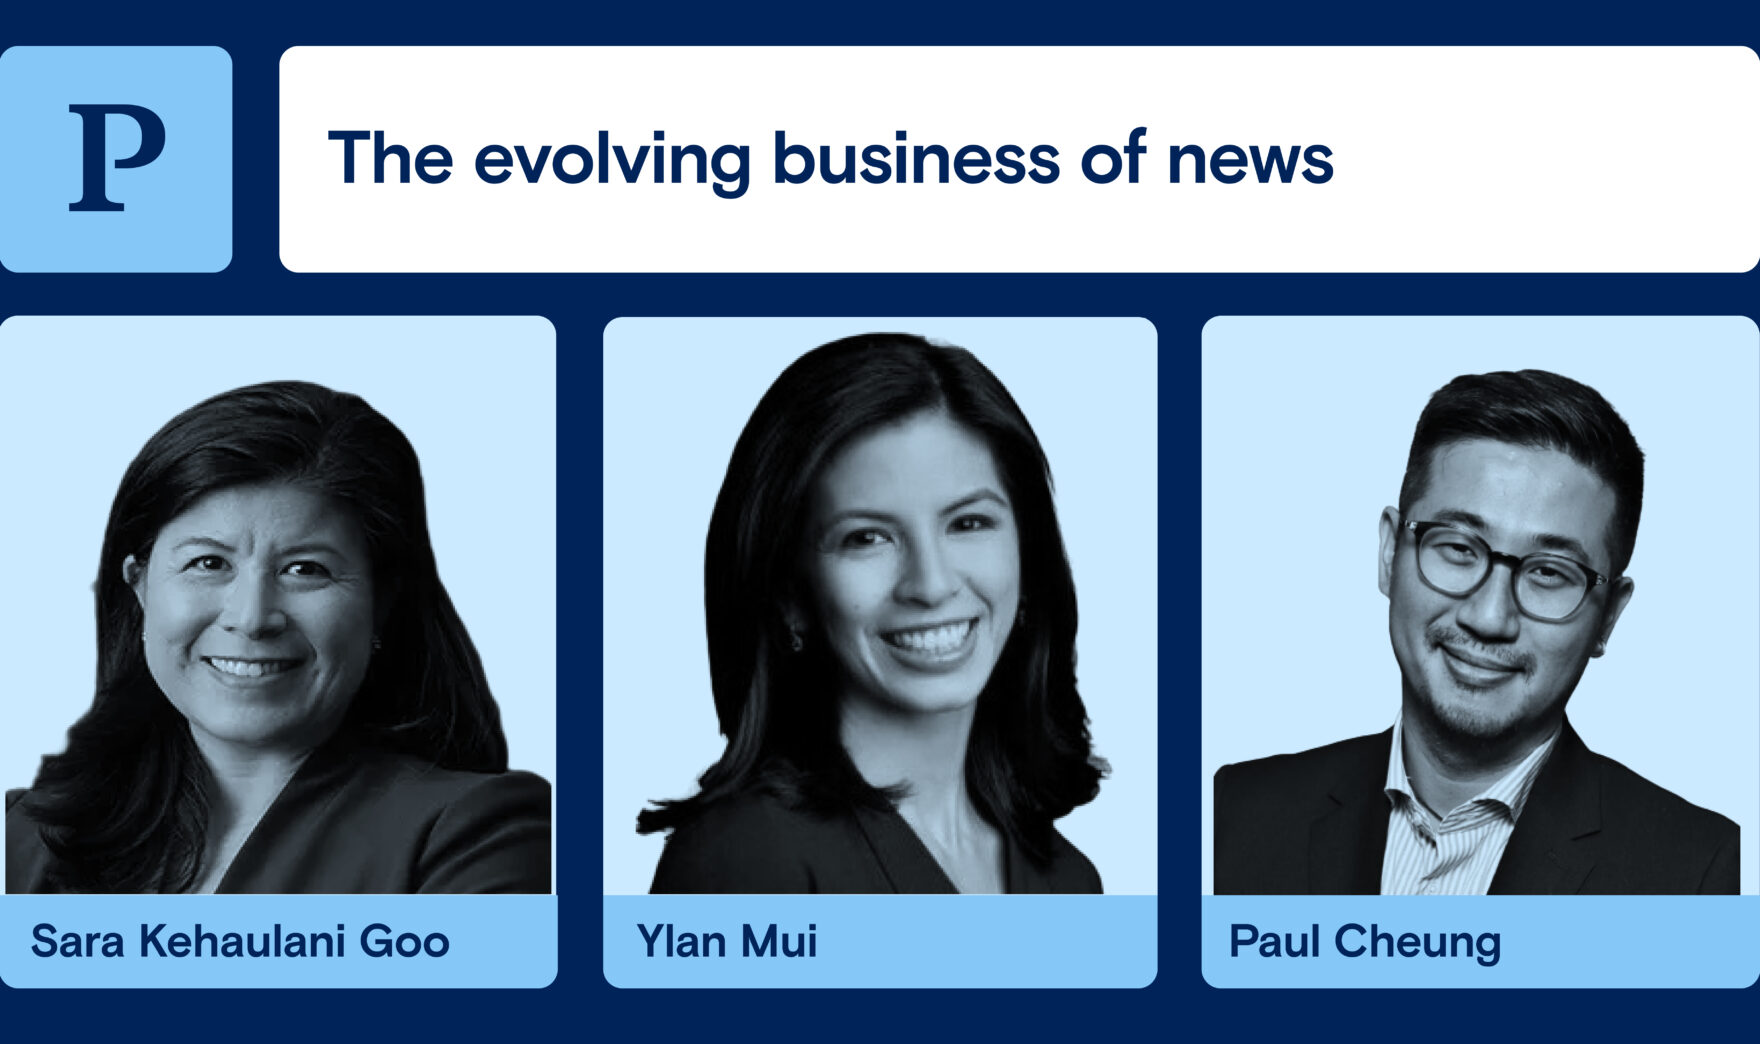 The evolving business of news